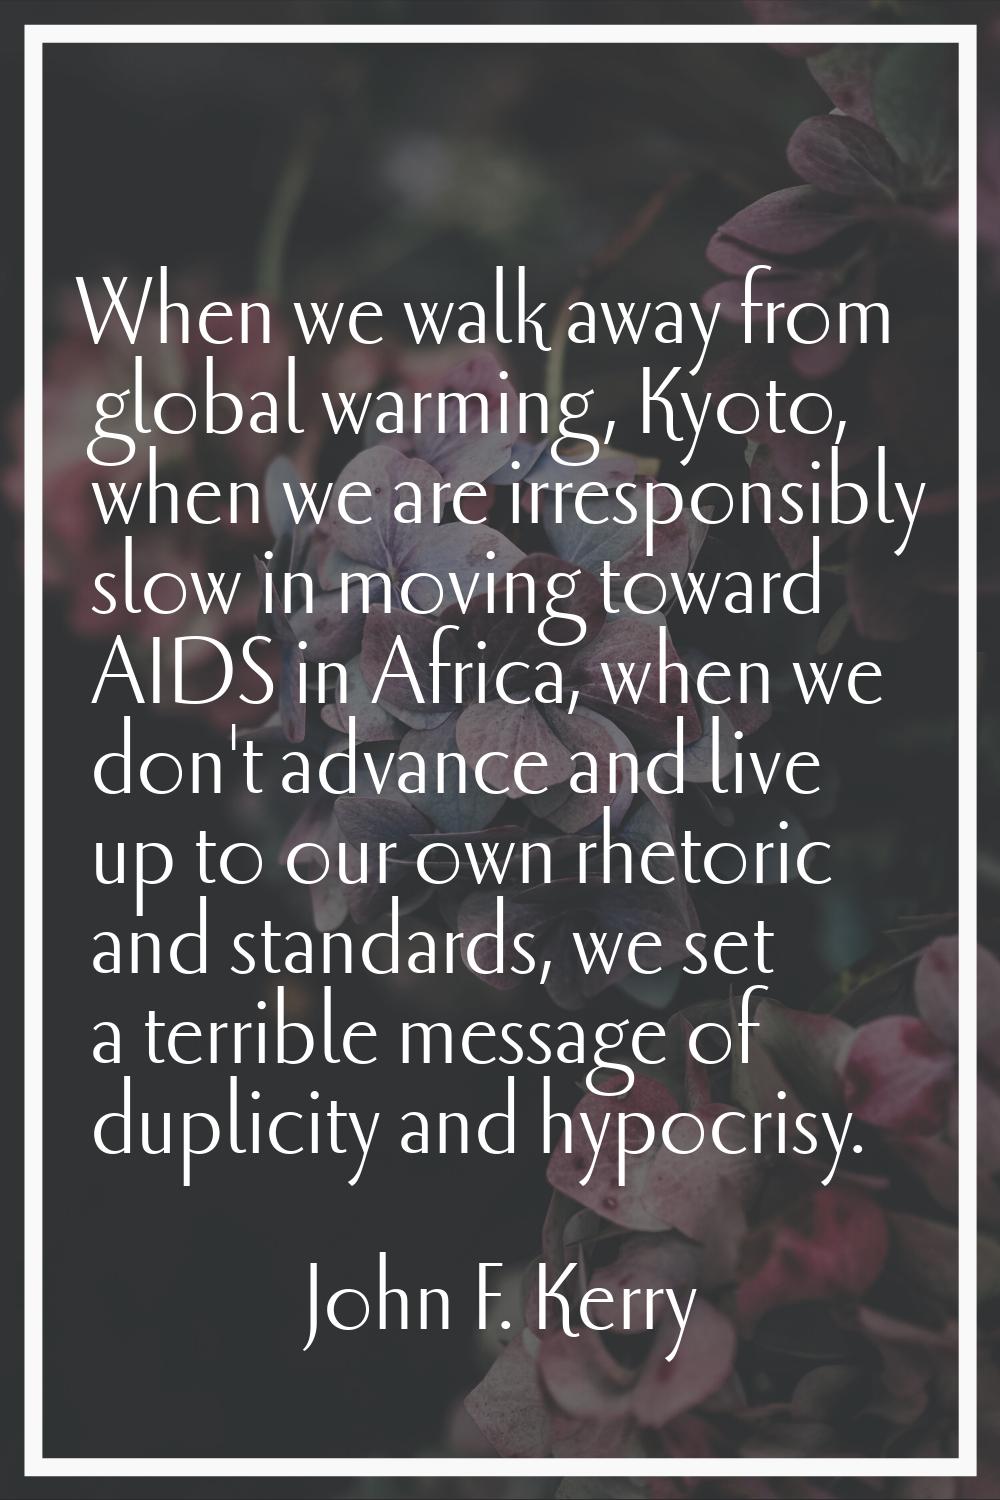 When we walk away from global warming, Kyoto, when we are irresponsibly slow in moving toward AIDS 